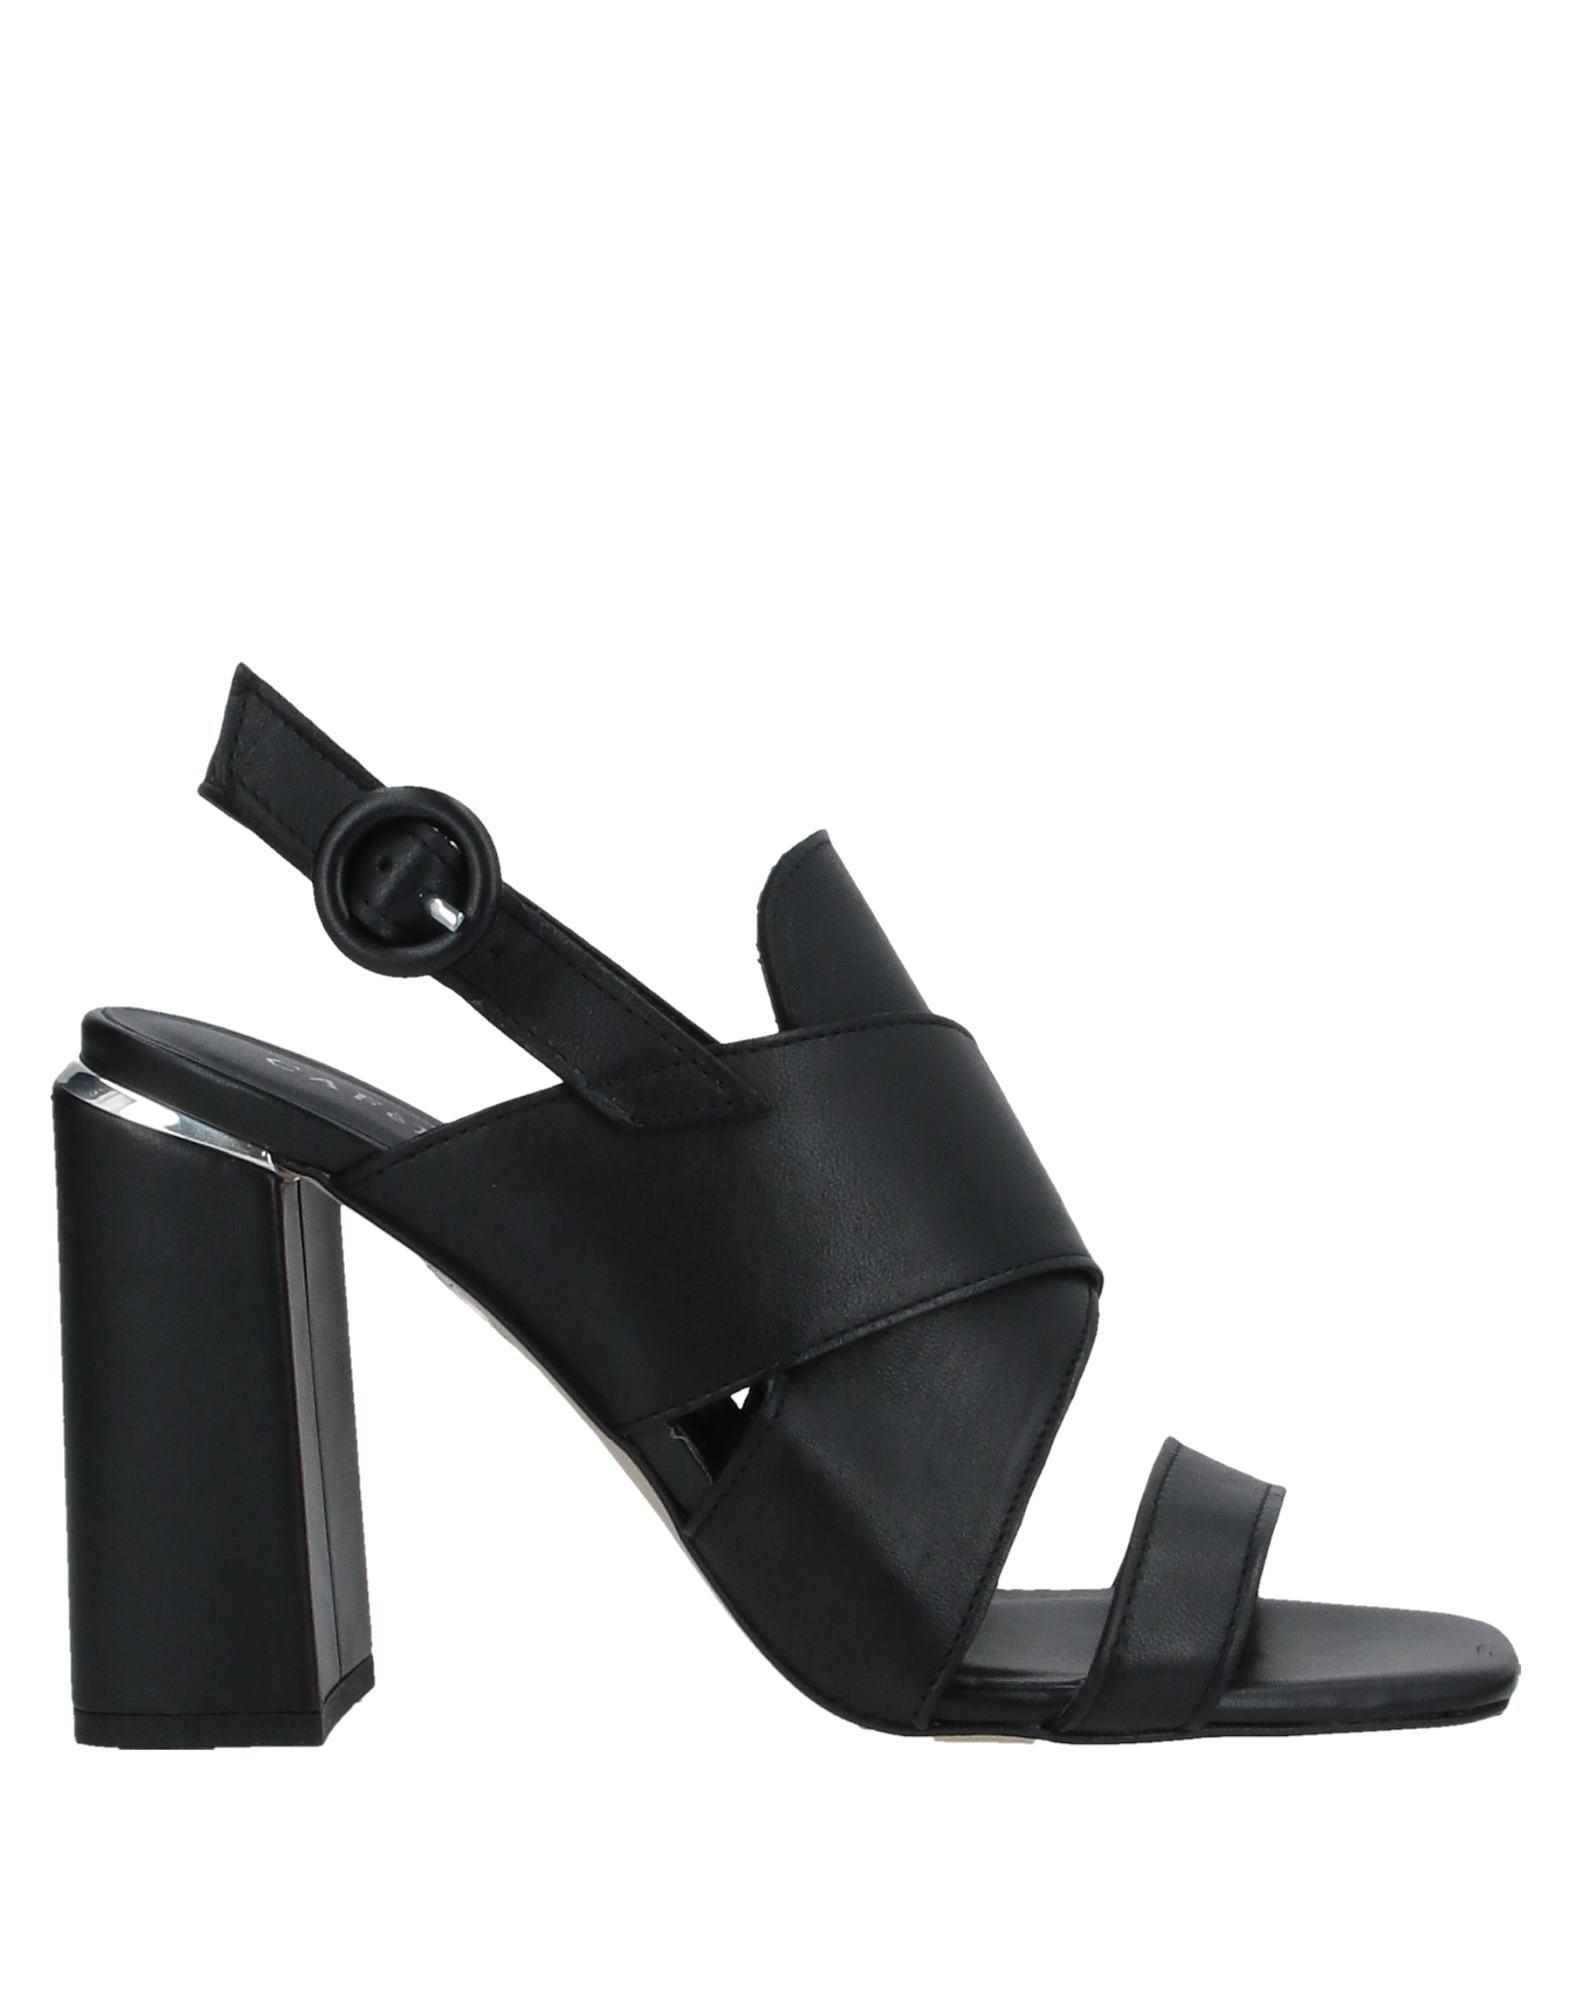 CafeNoir Leather Sandals in Black - Lyst